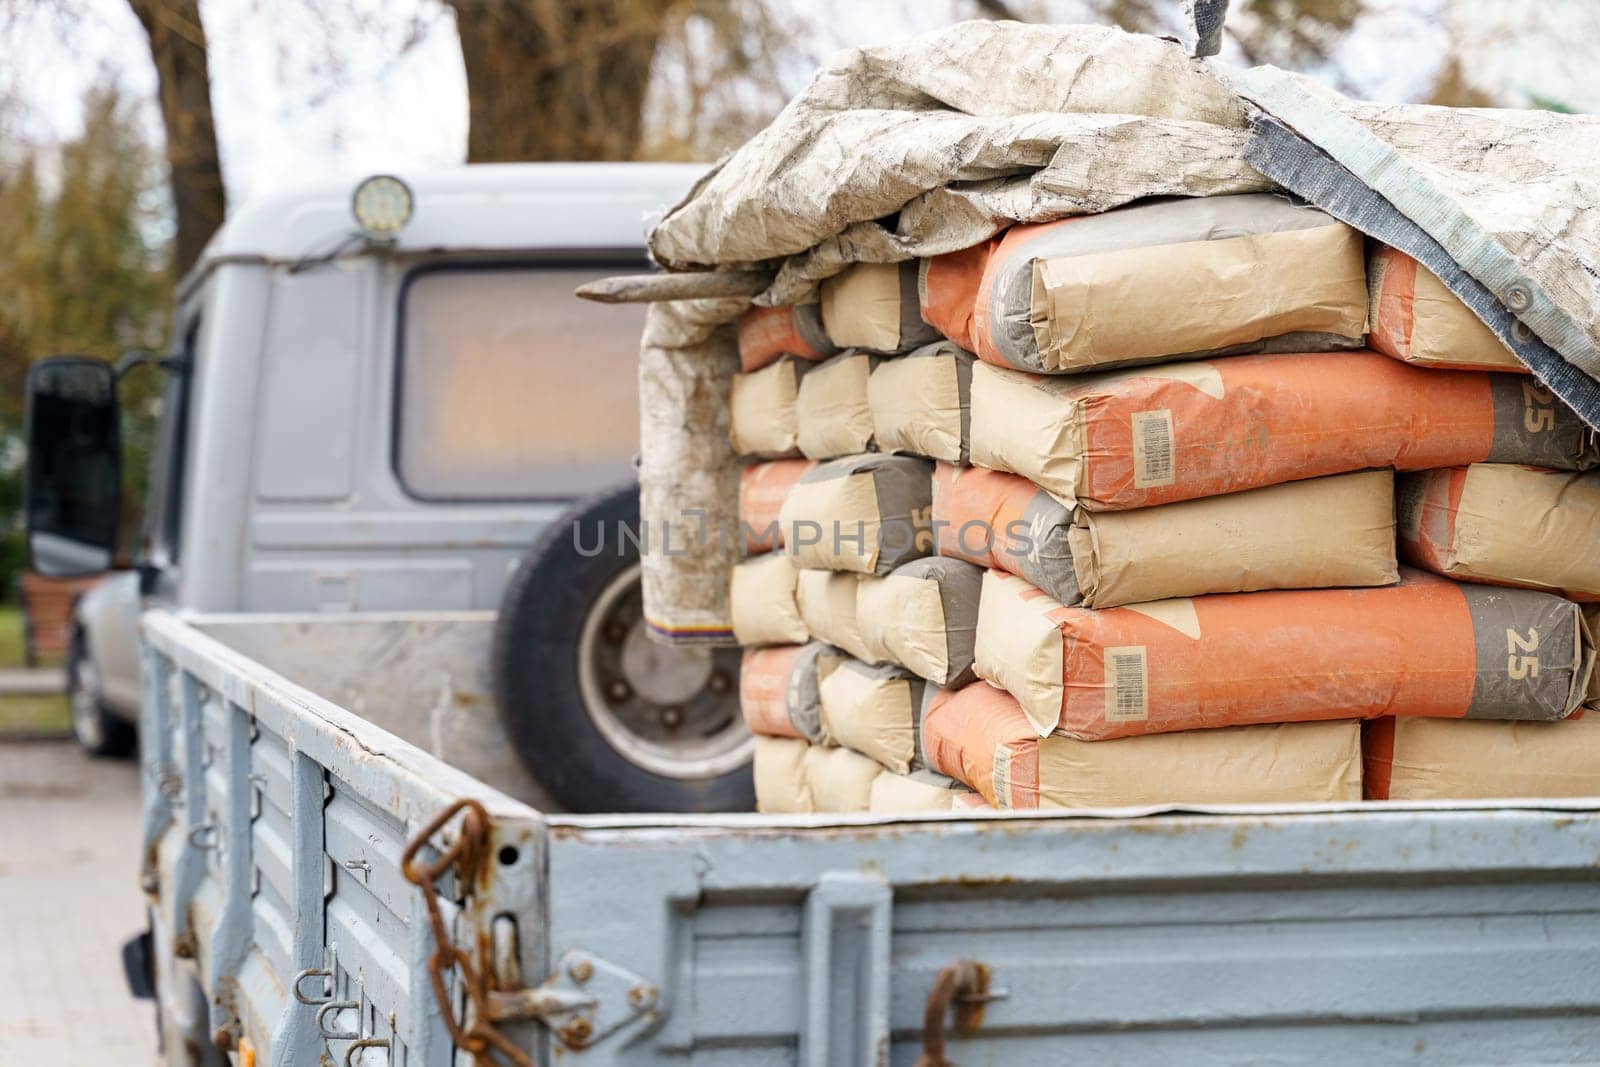 A pickup truck bed is filled with stacked cement bags, indicating ongoing construction work at a site.